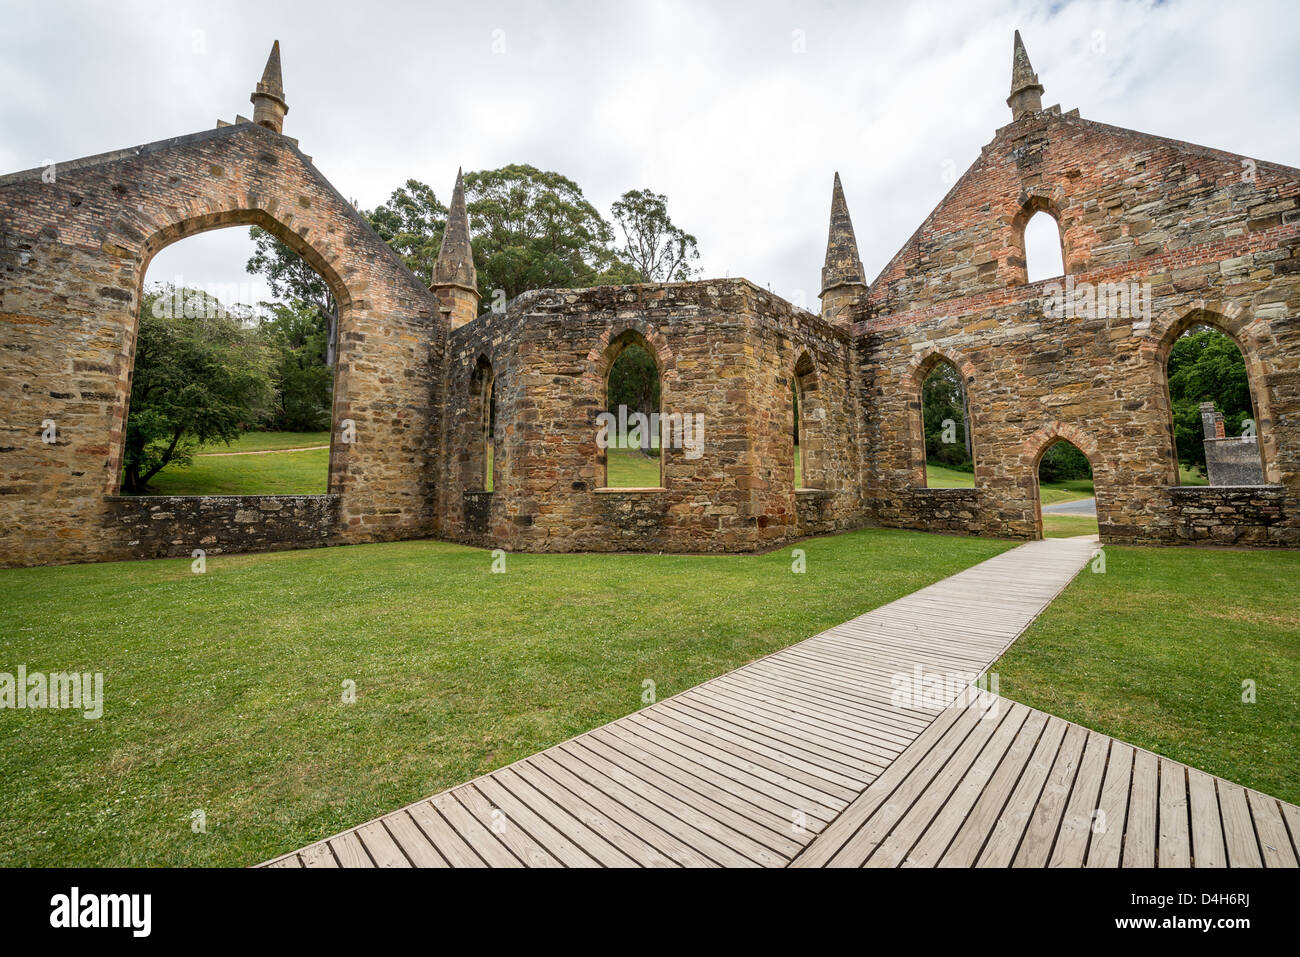 Building ruins at Port Arthur, Tasmania which was once a penal settlement in Australia's convict beginnings. Stock Photo